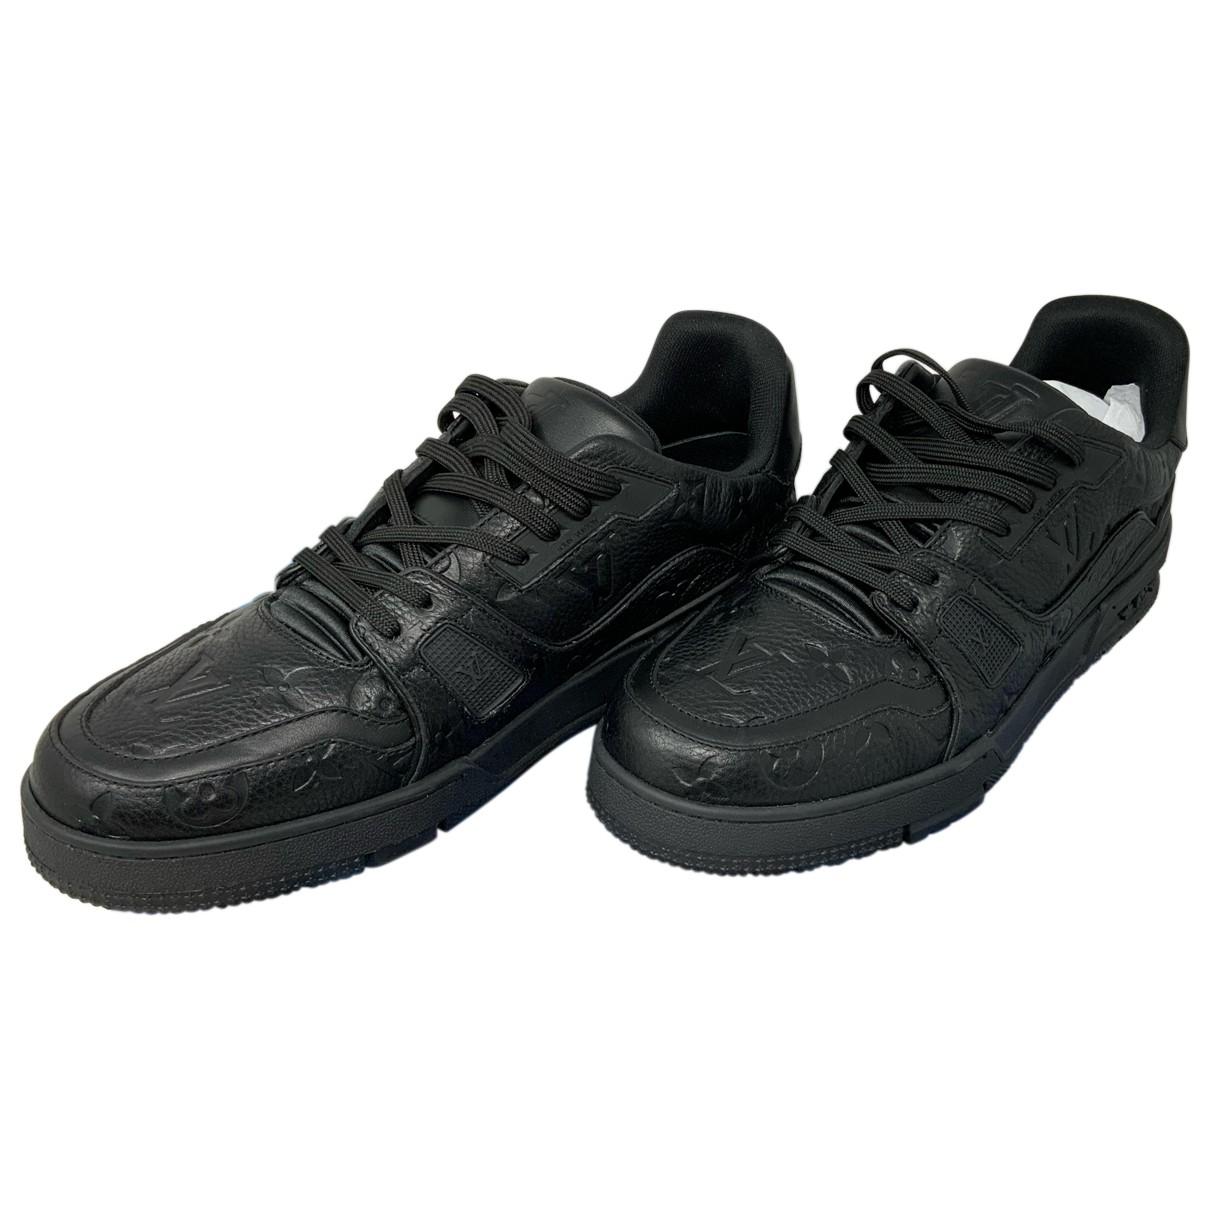 Lv trainer leather low trainers Louis Vuitton Black size 10 UK in